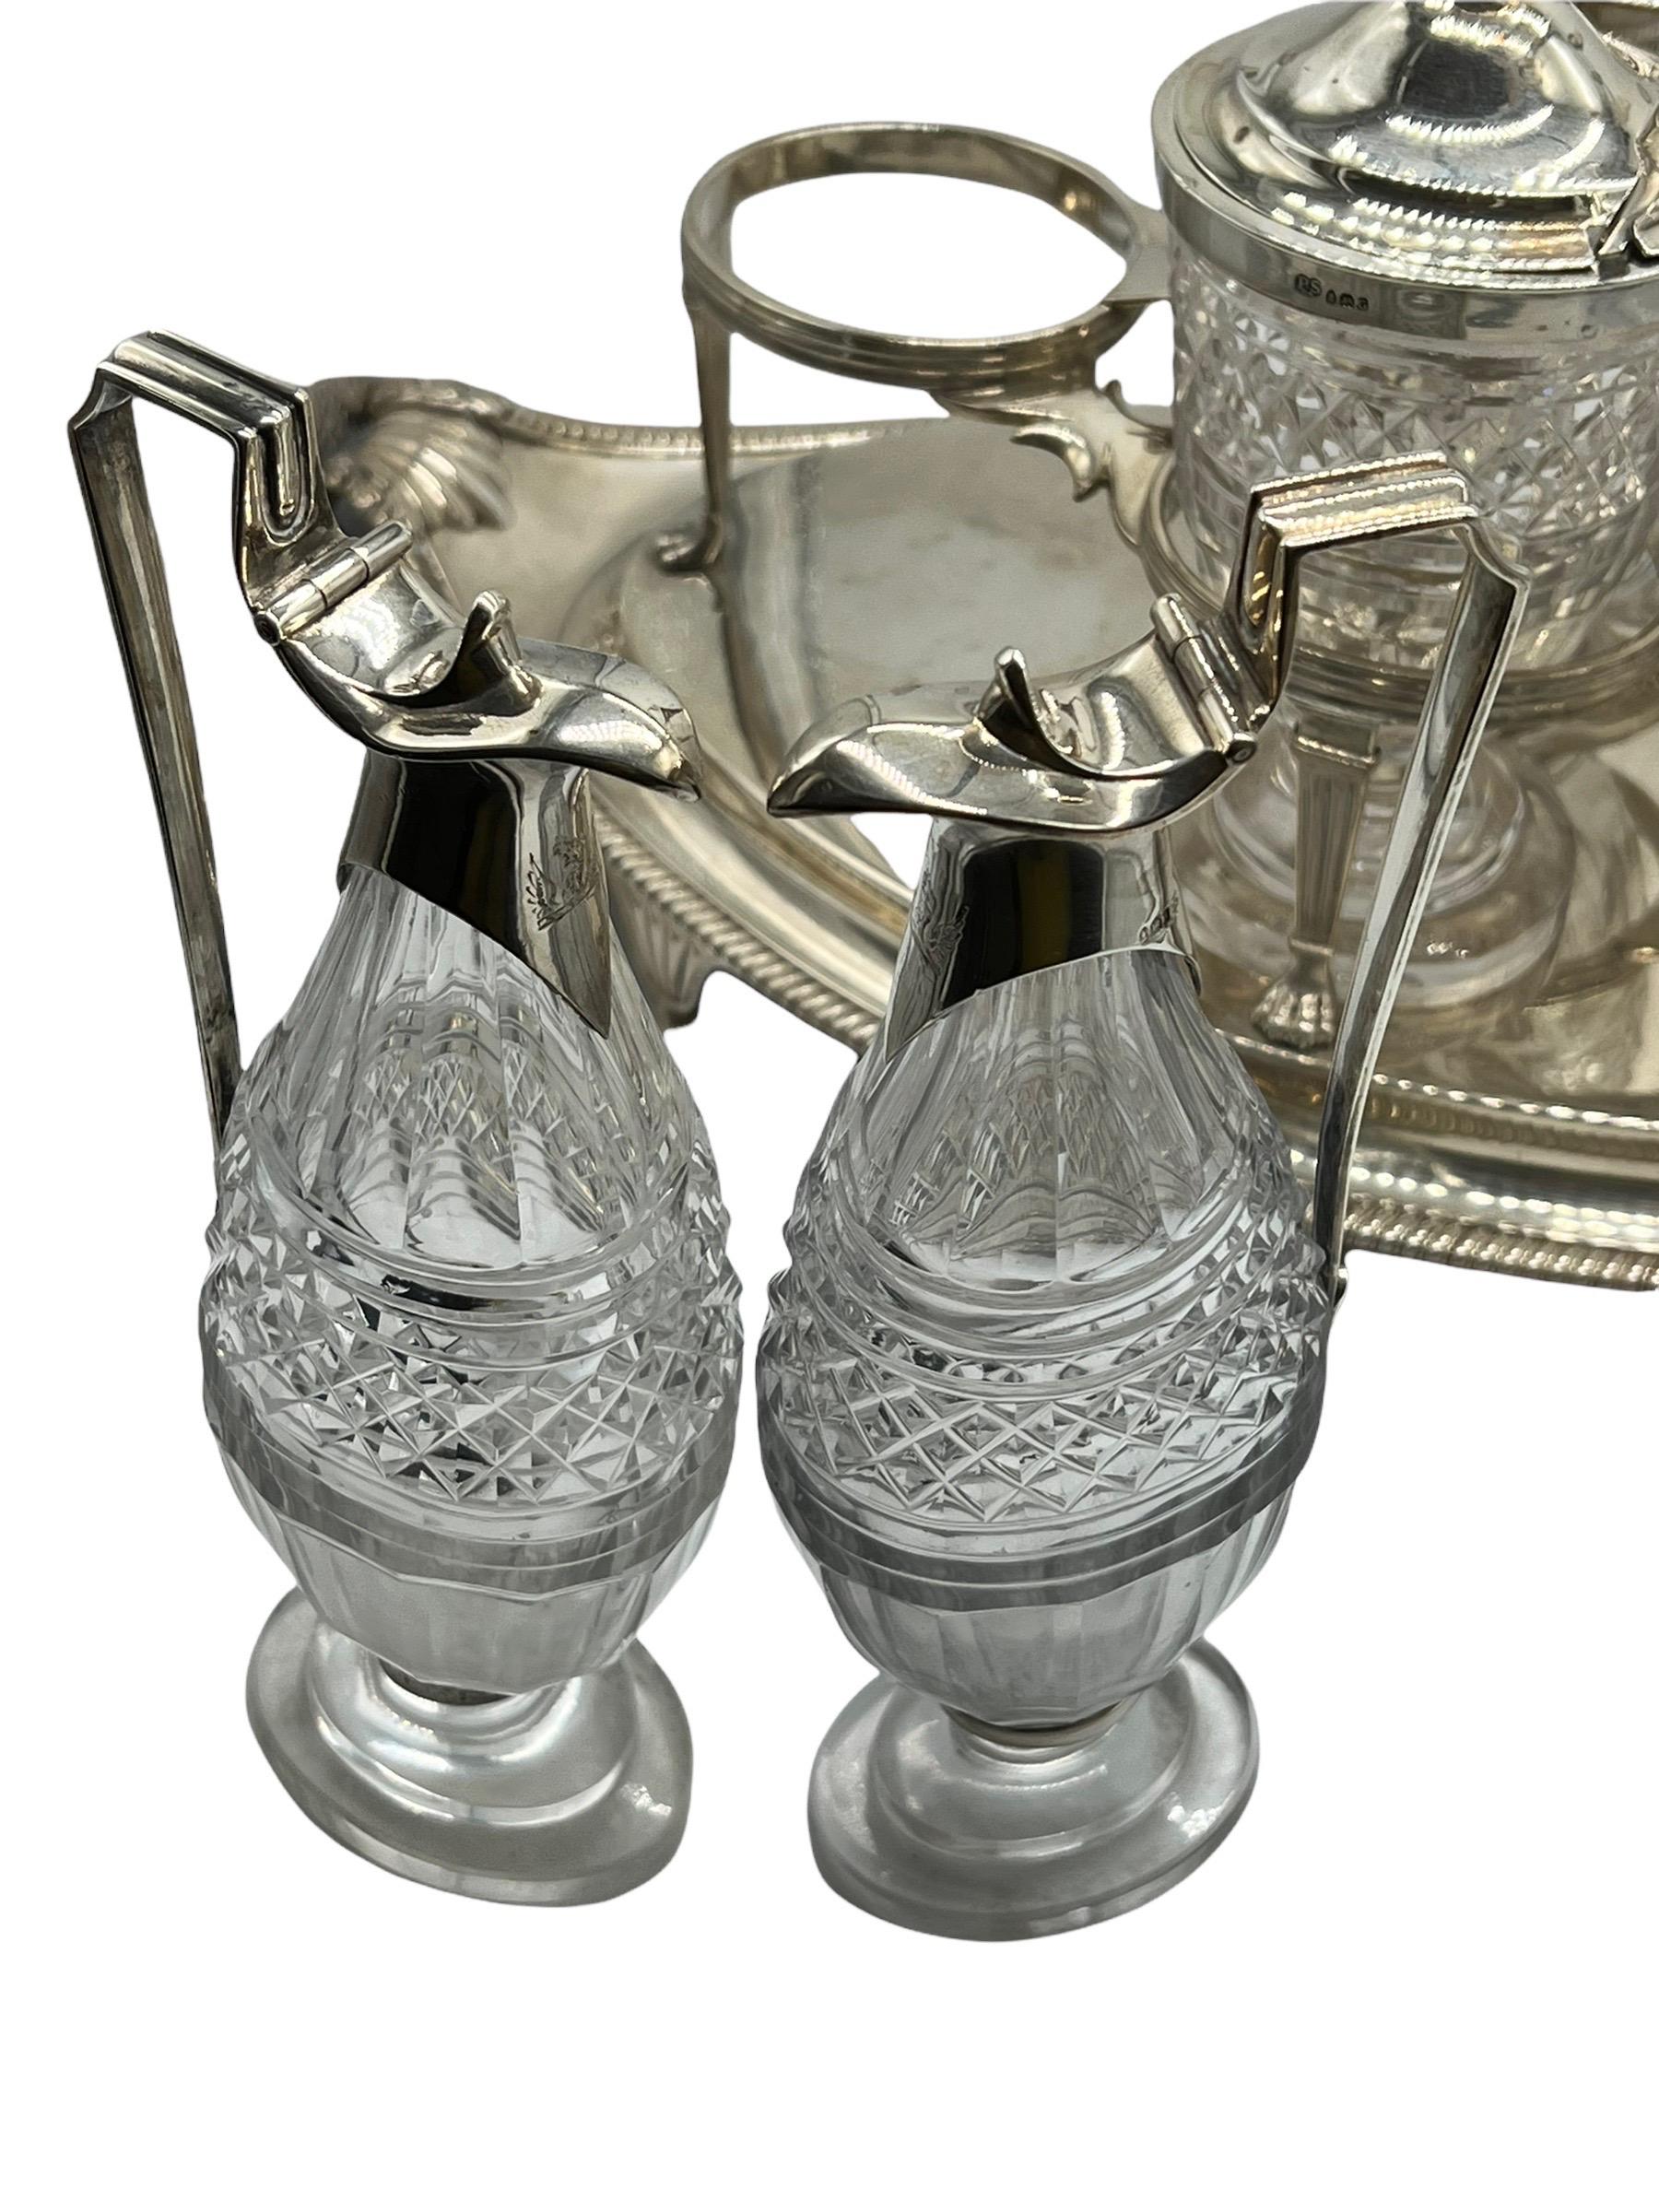 Sterling Silver and Cut-Glass Cruet Set by Paul Storr, Early 1800s For Sale 11